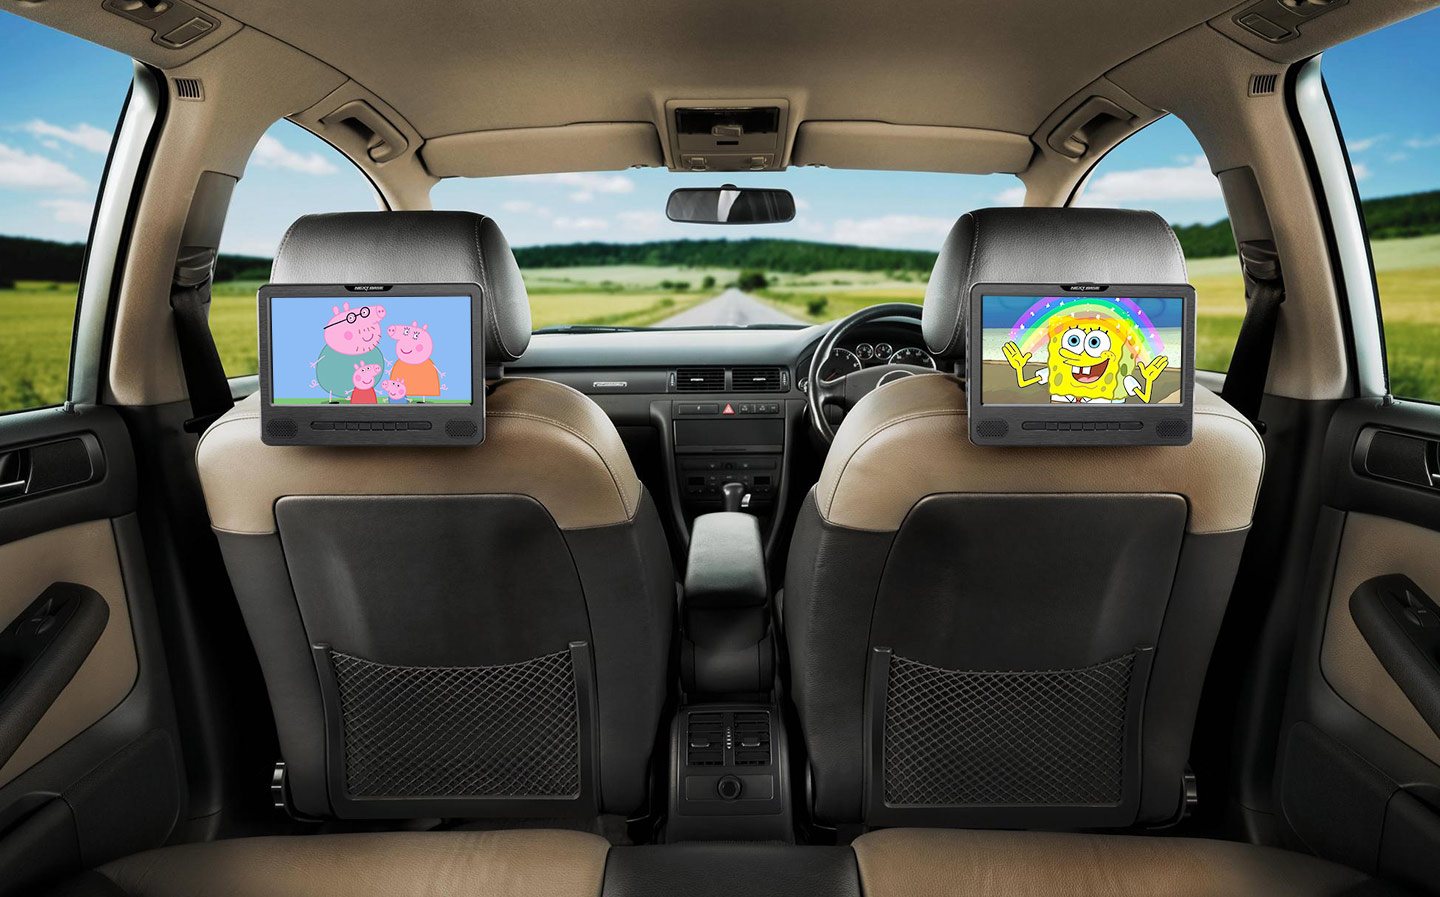 What Vehicles have Built in Car DVD Players in them and Best Car DVD Players for them